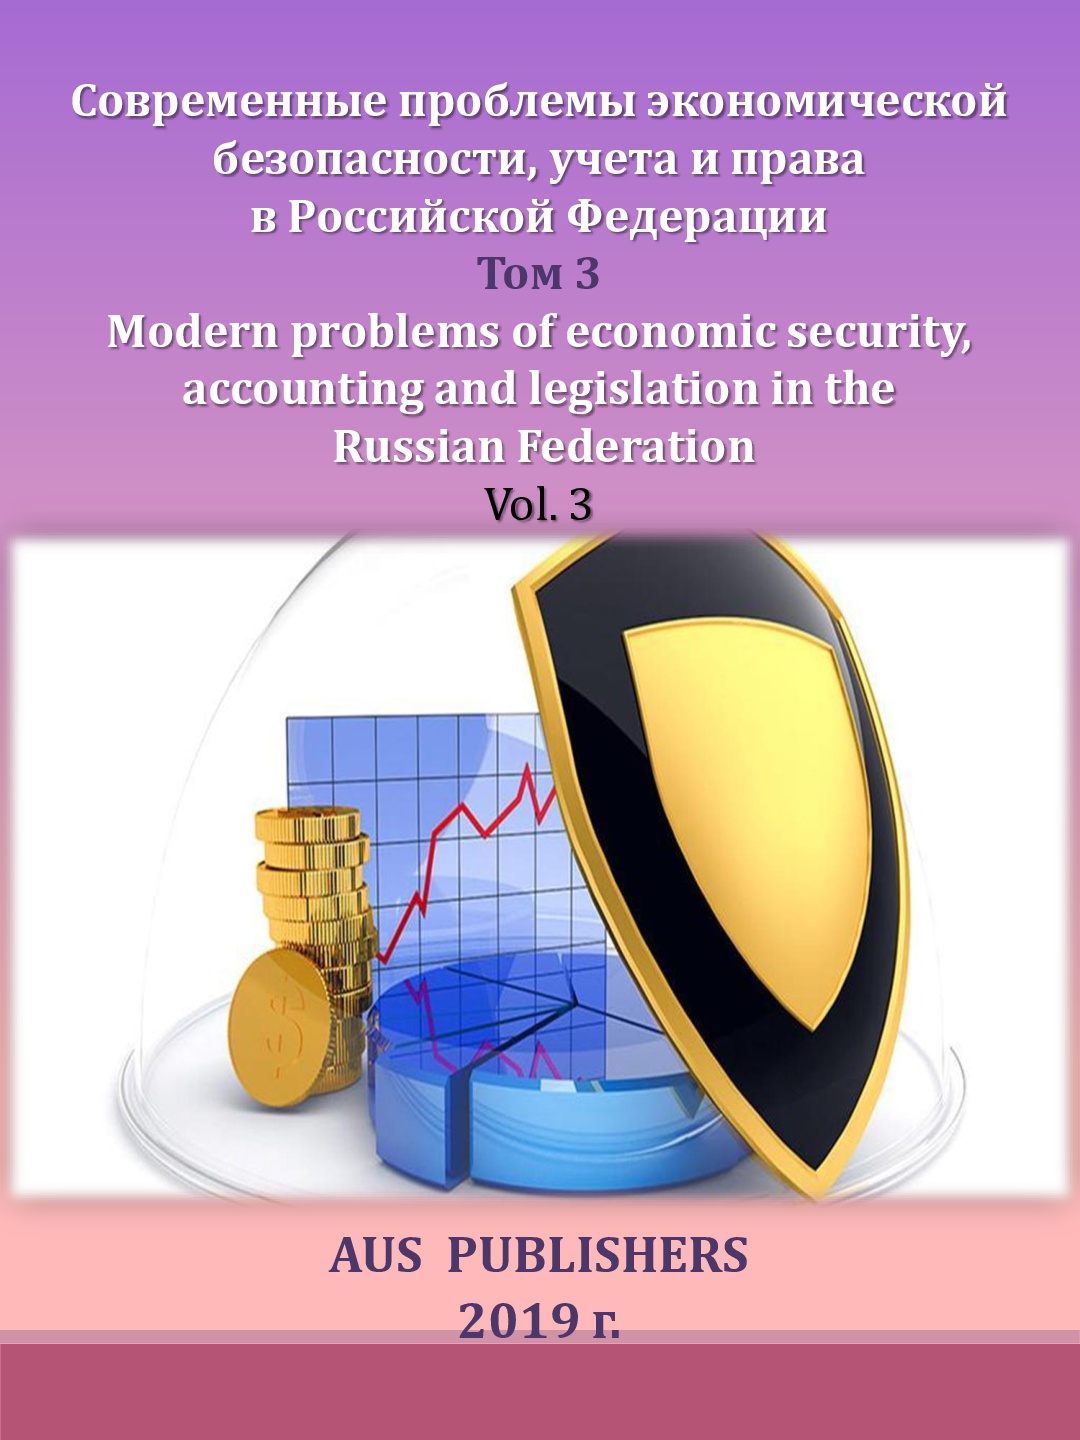                         Modern problems of an economic safety, accounting and the right in the Russian Federation. Vol.3
            